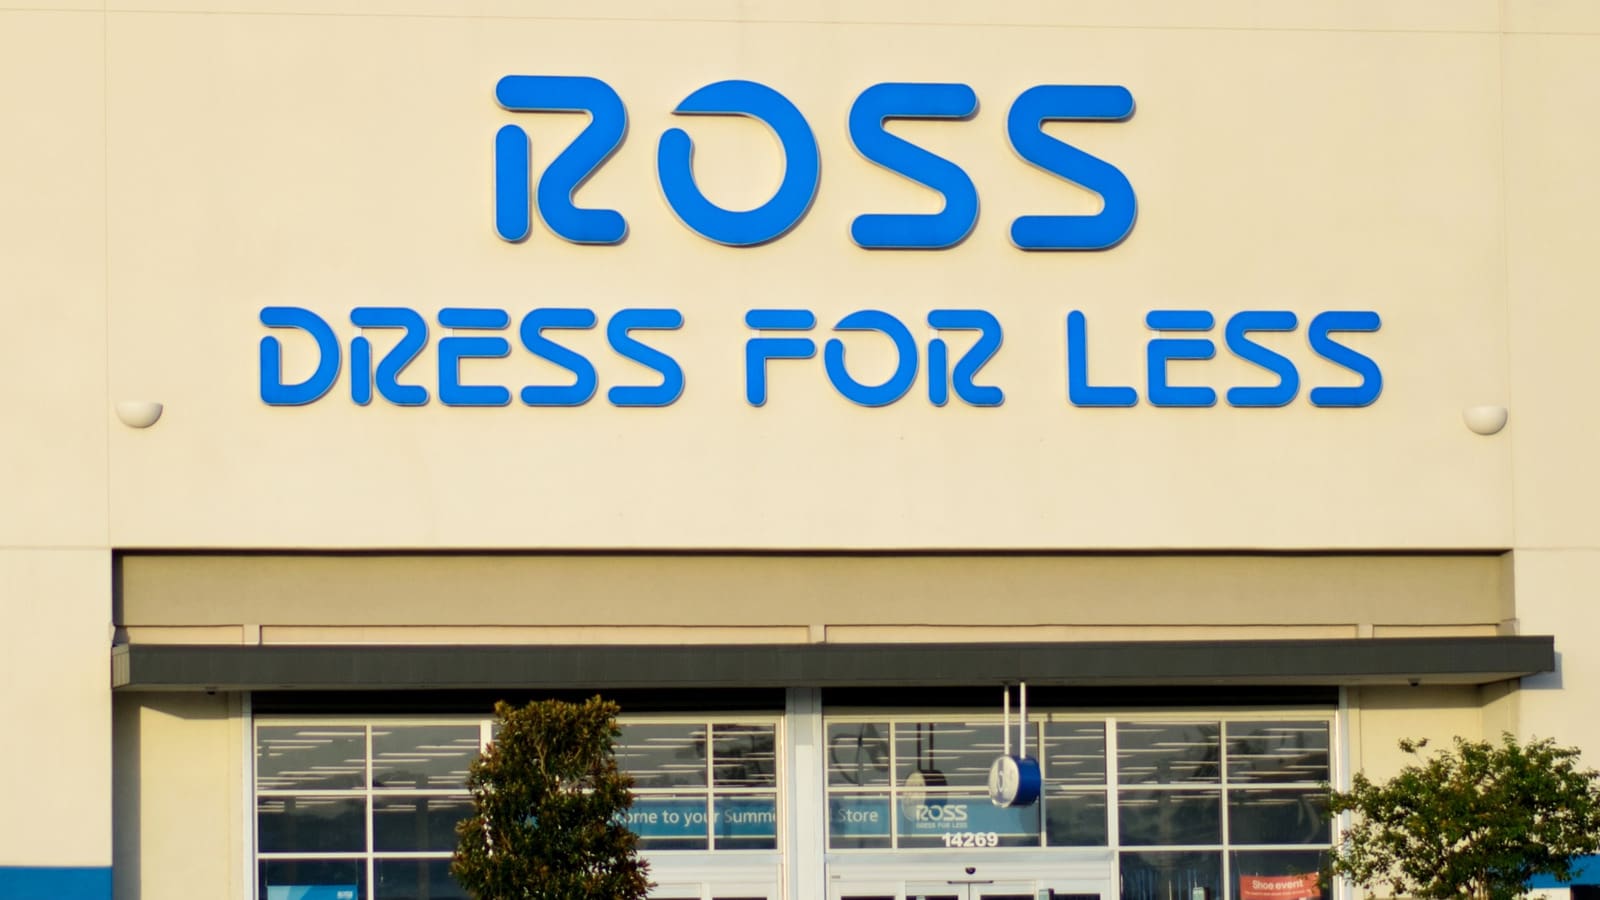 If you build it, they will come: Ross Dress for Less opens on east